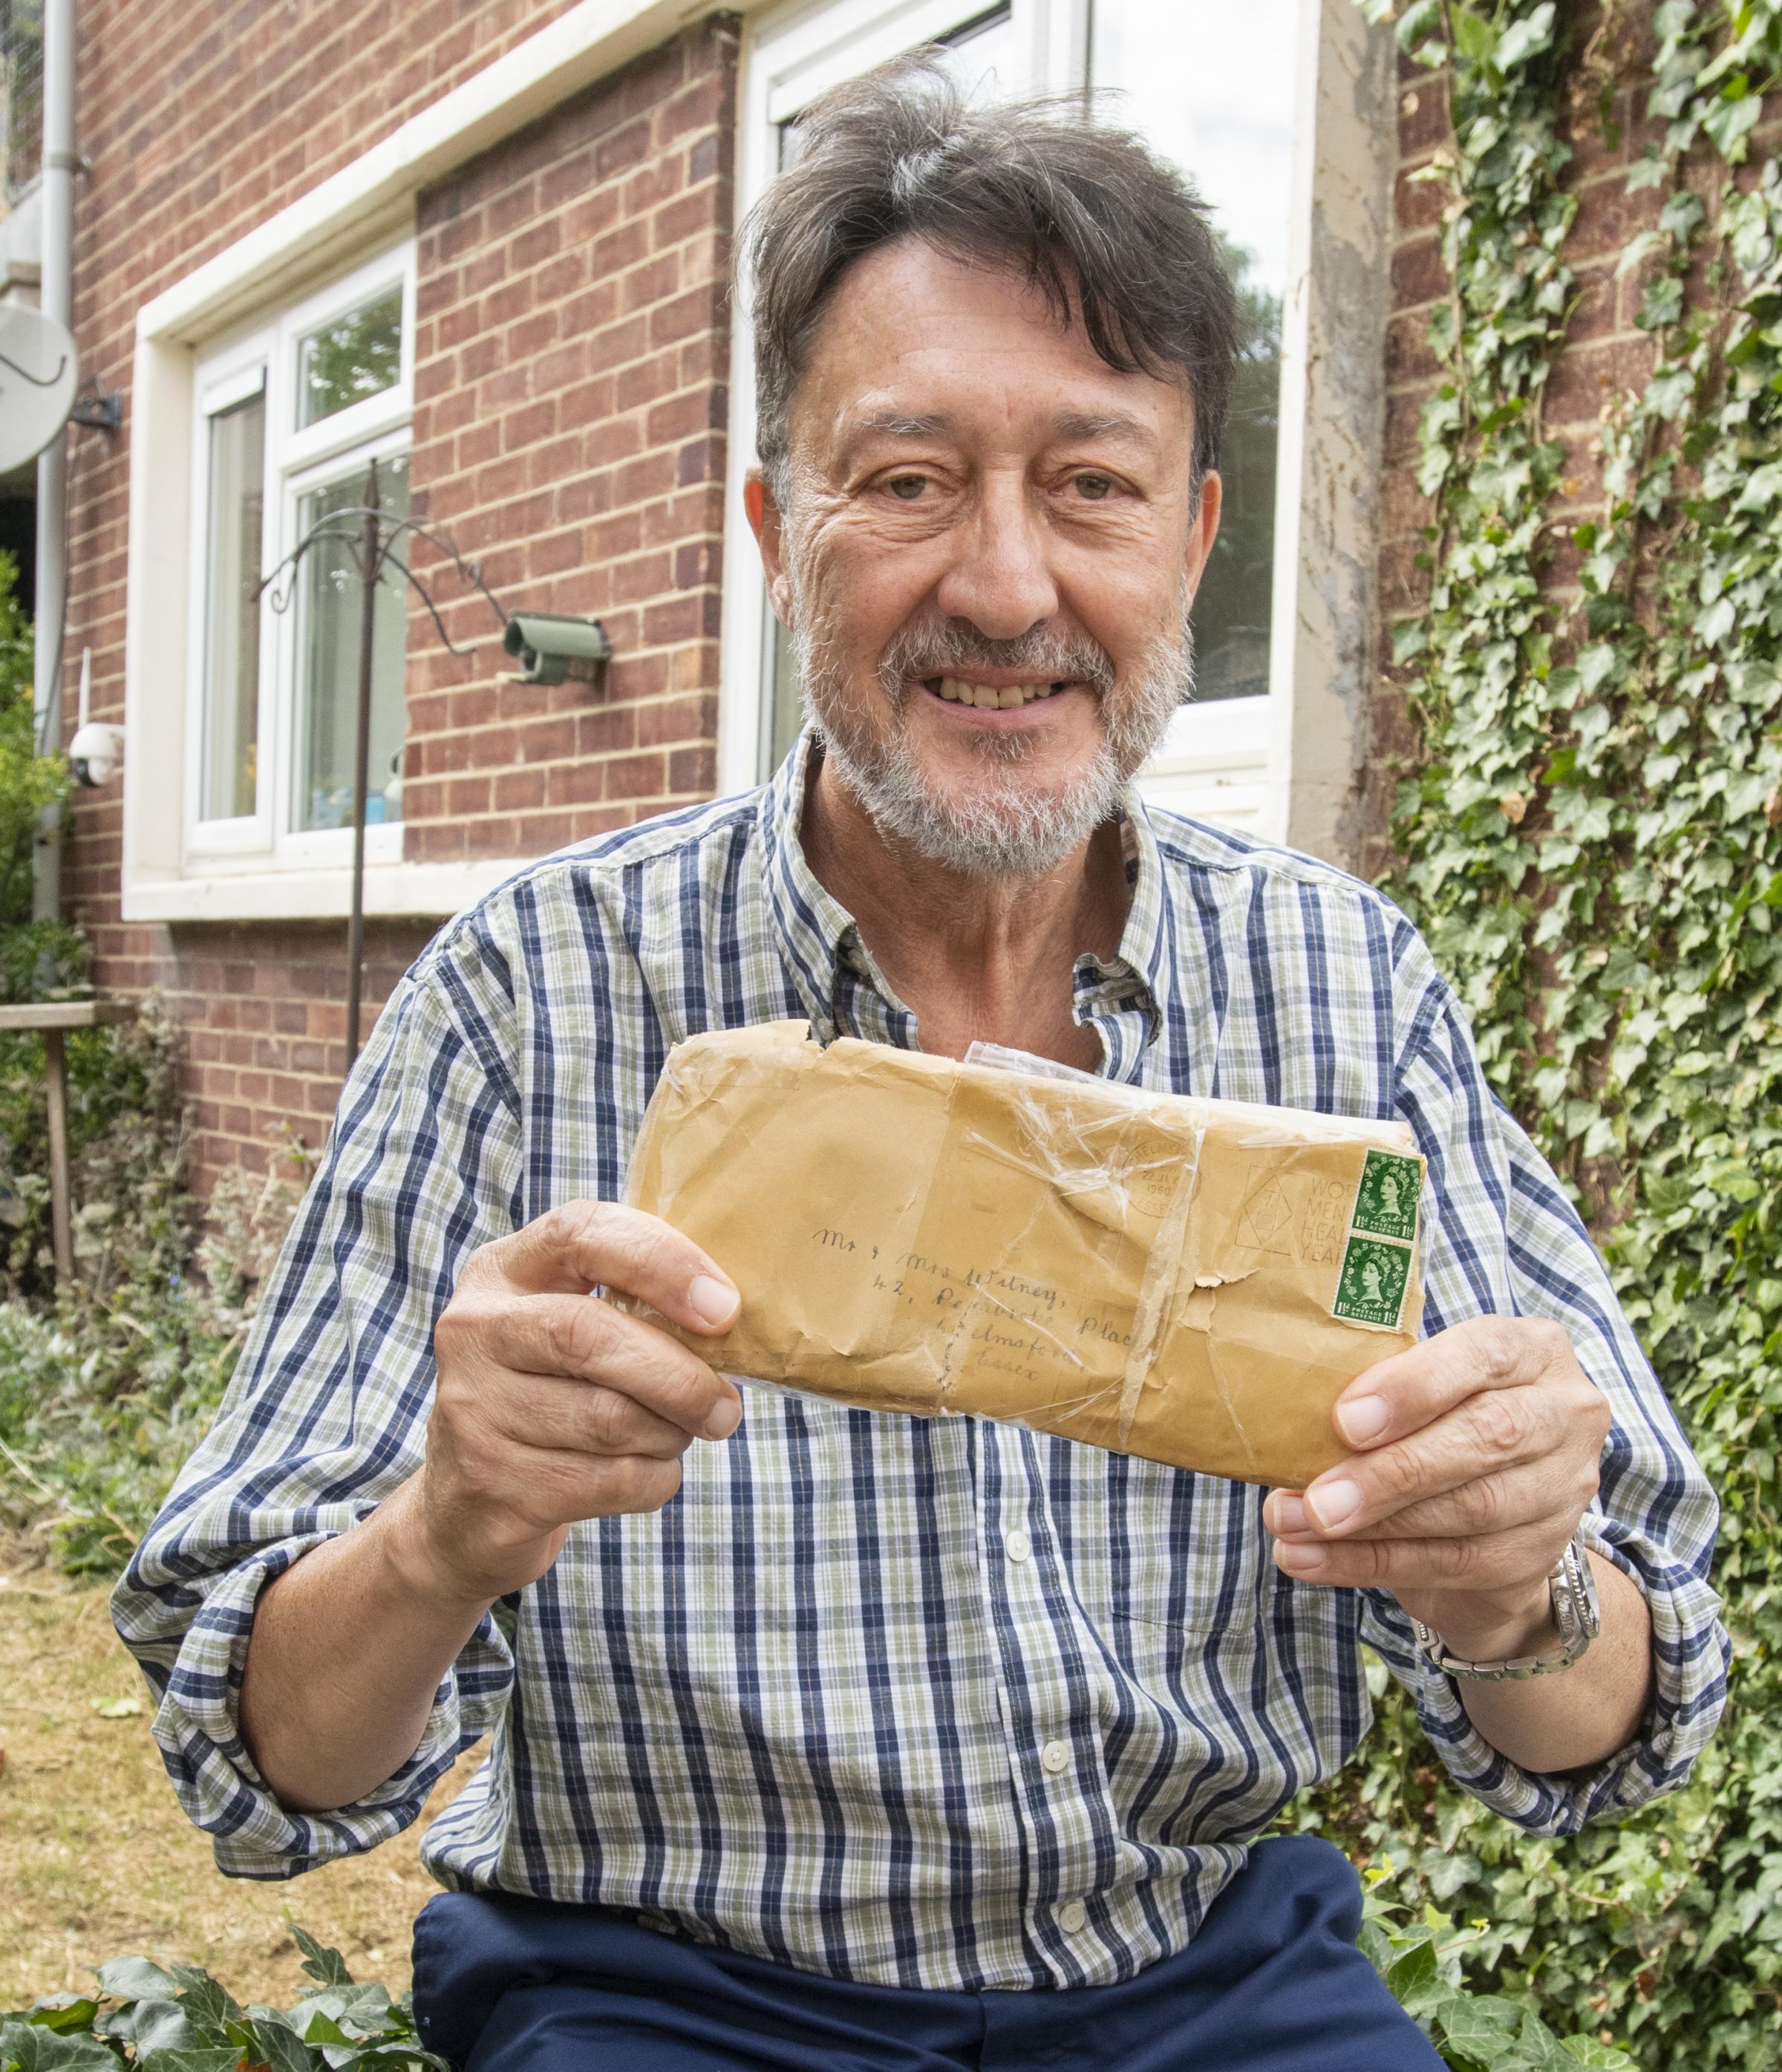 Philip Witney is pictured outside the house he grew up in that the package arrived at 62 years later. Philip will now post the package to his sister Madeline Witney now 72 and living in California, USA. 